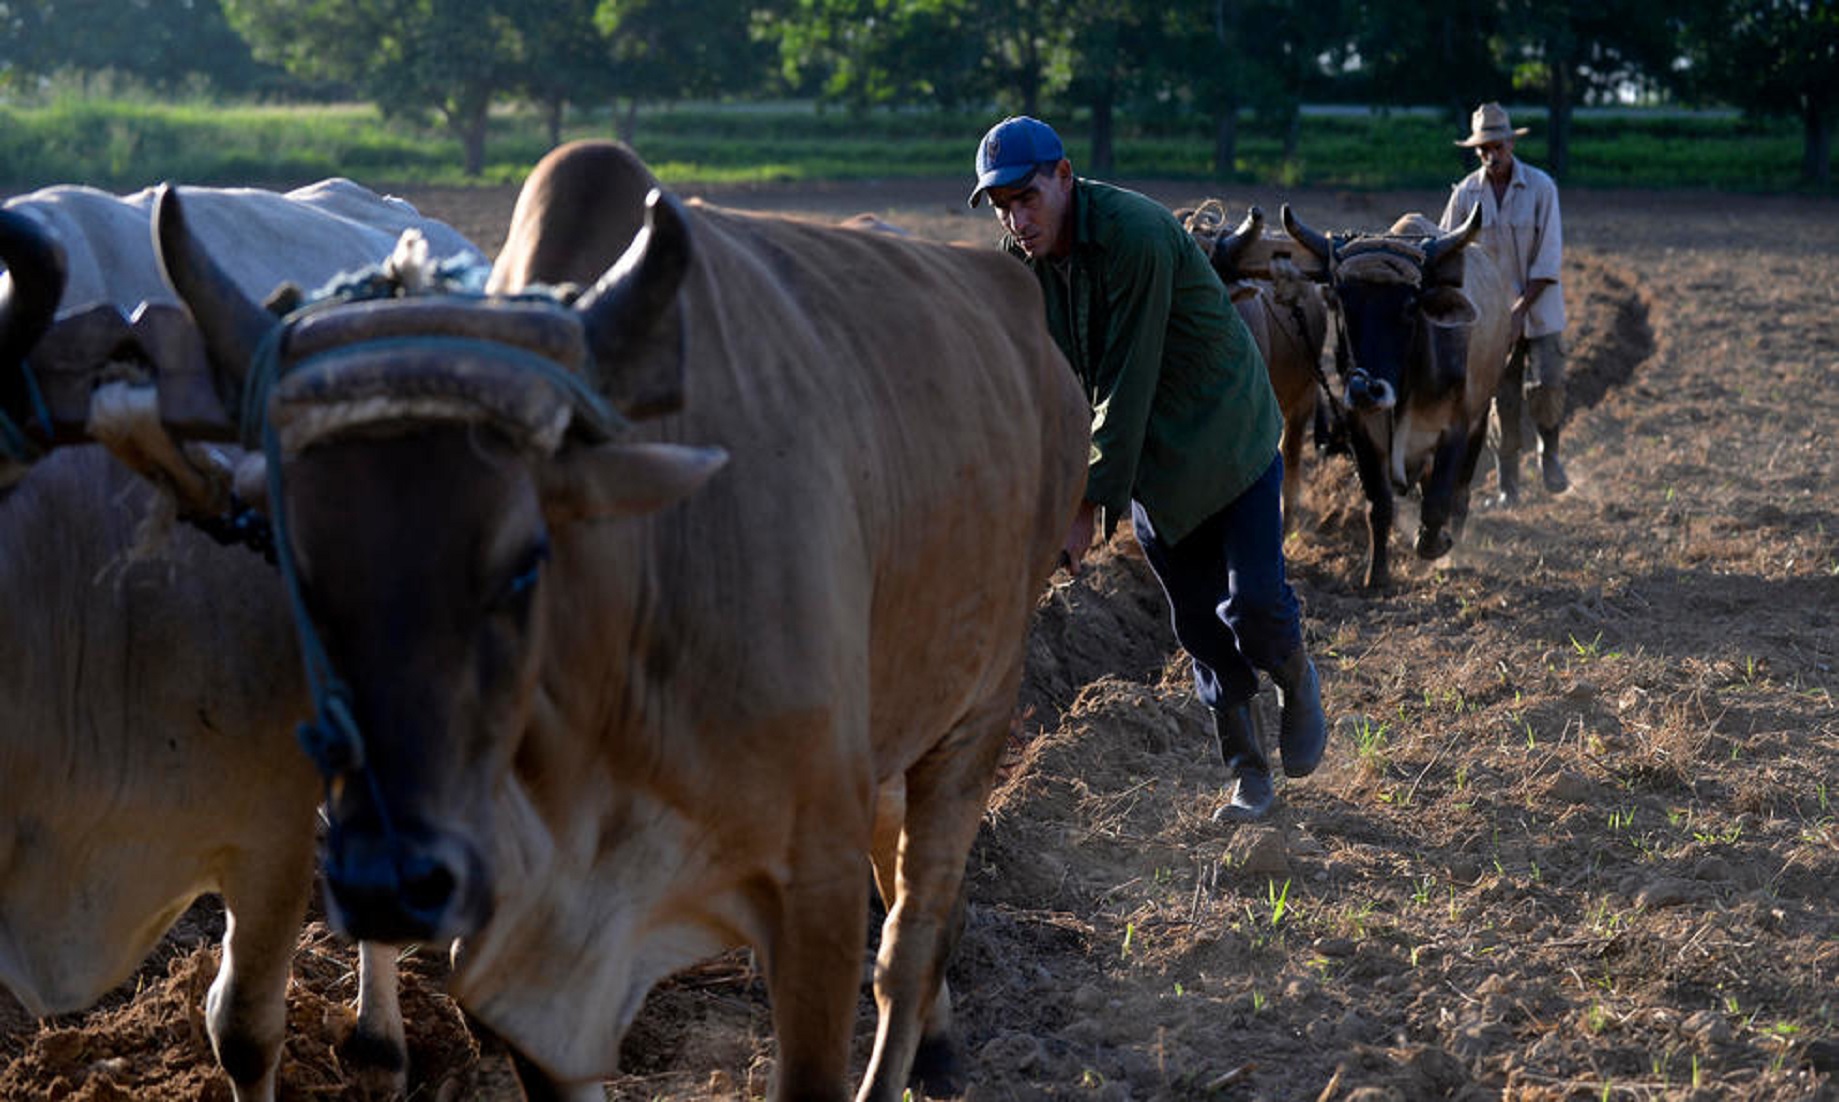 US blockade: Oxen and horses put back to work in Cuba